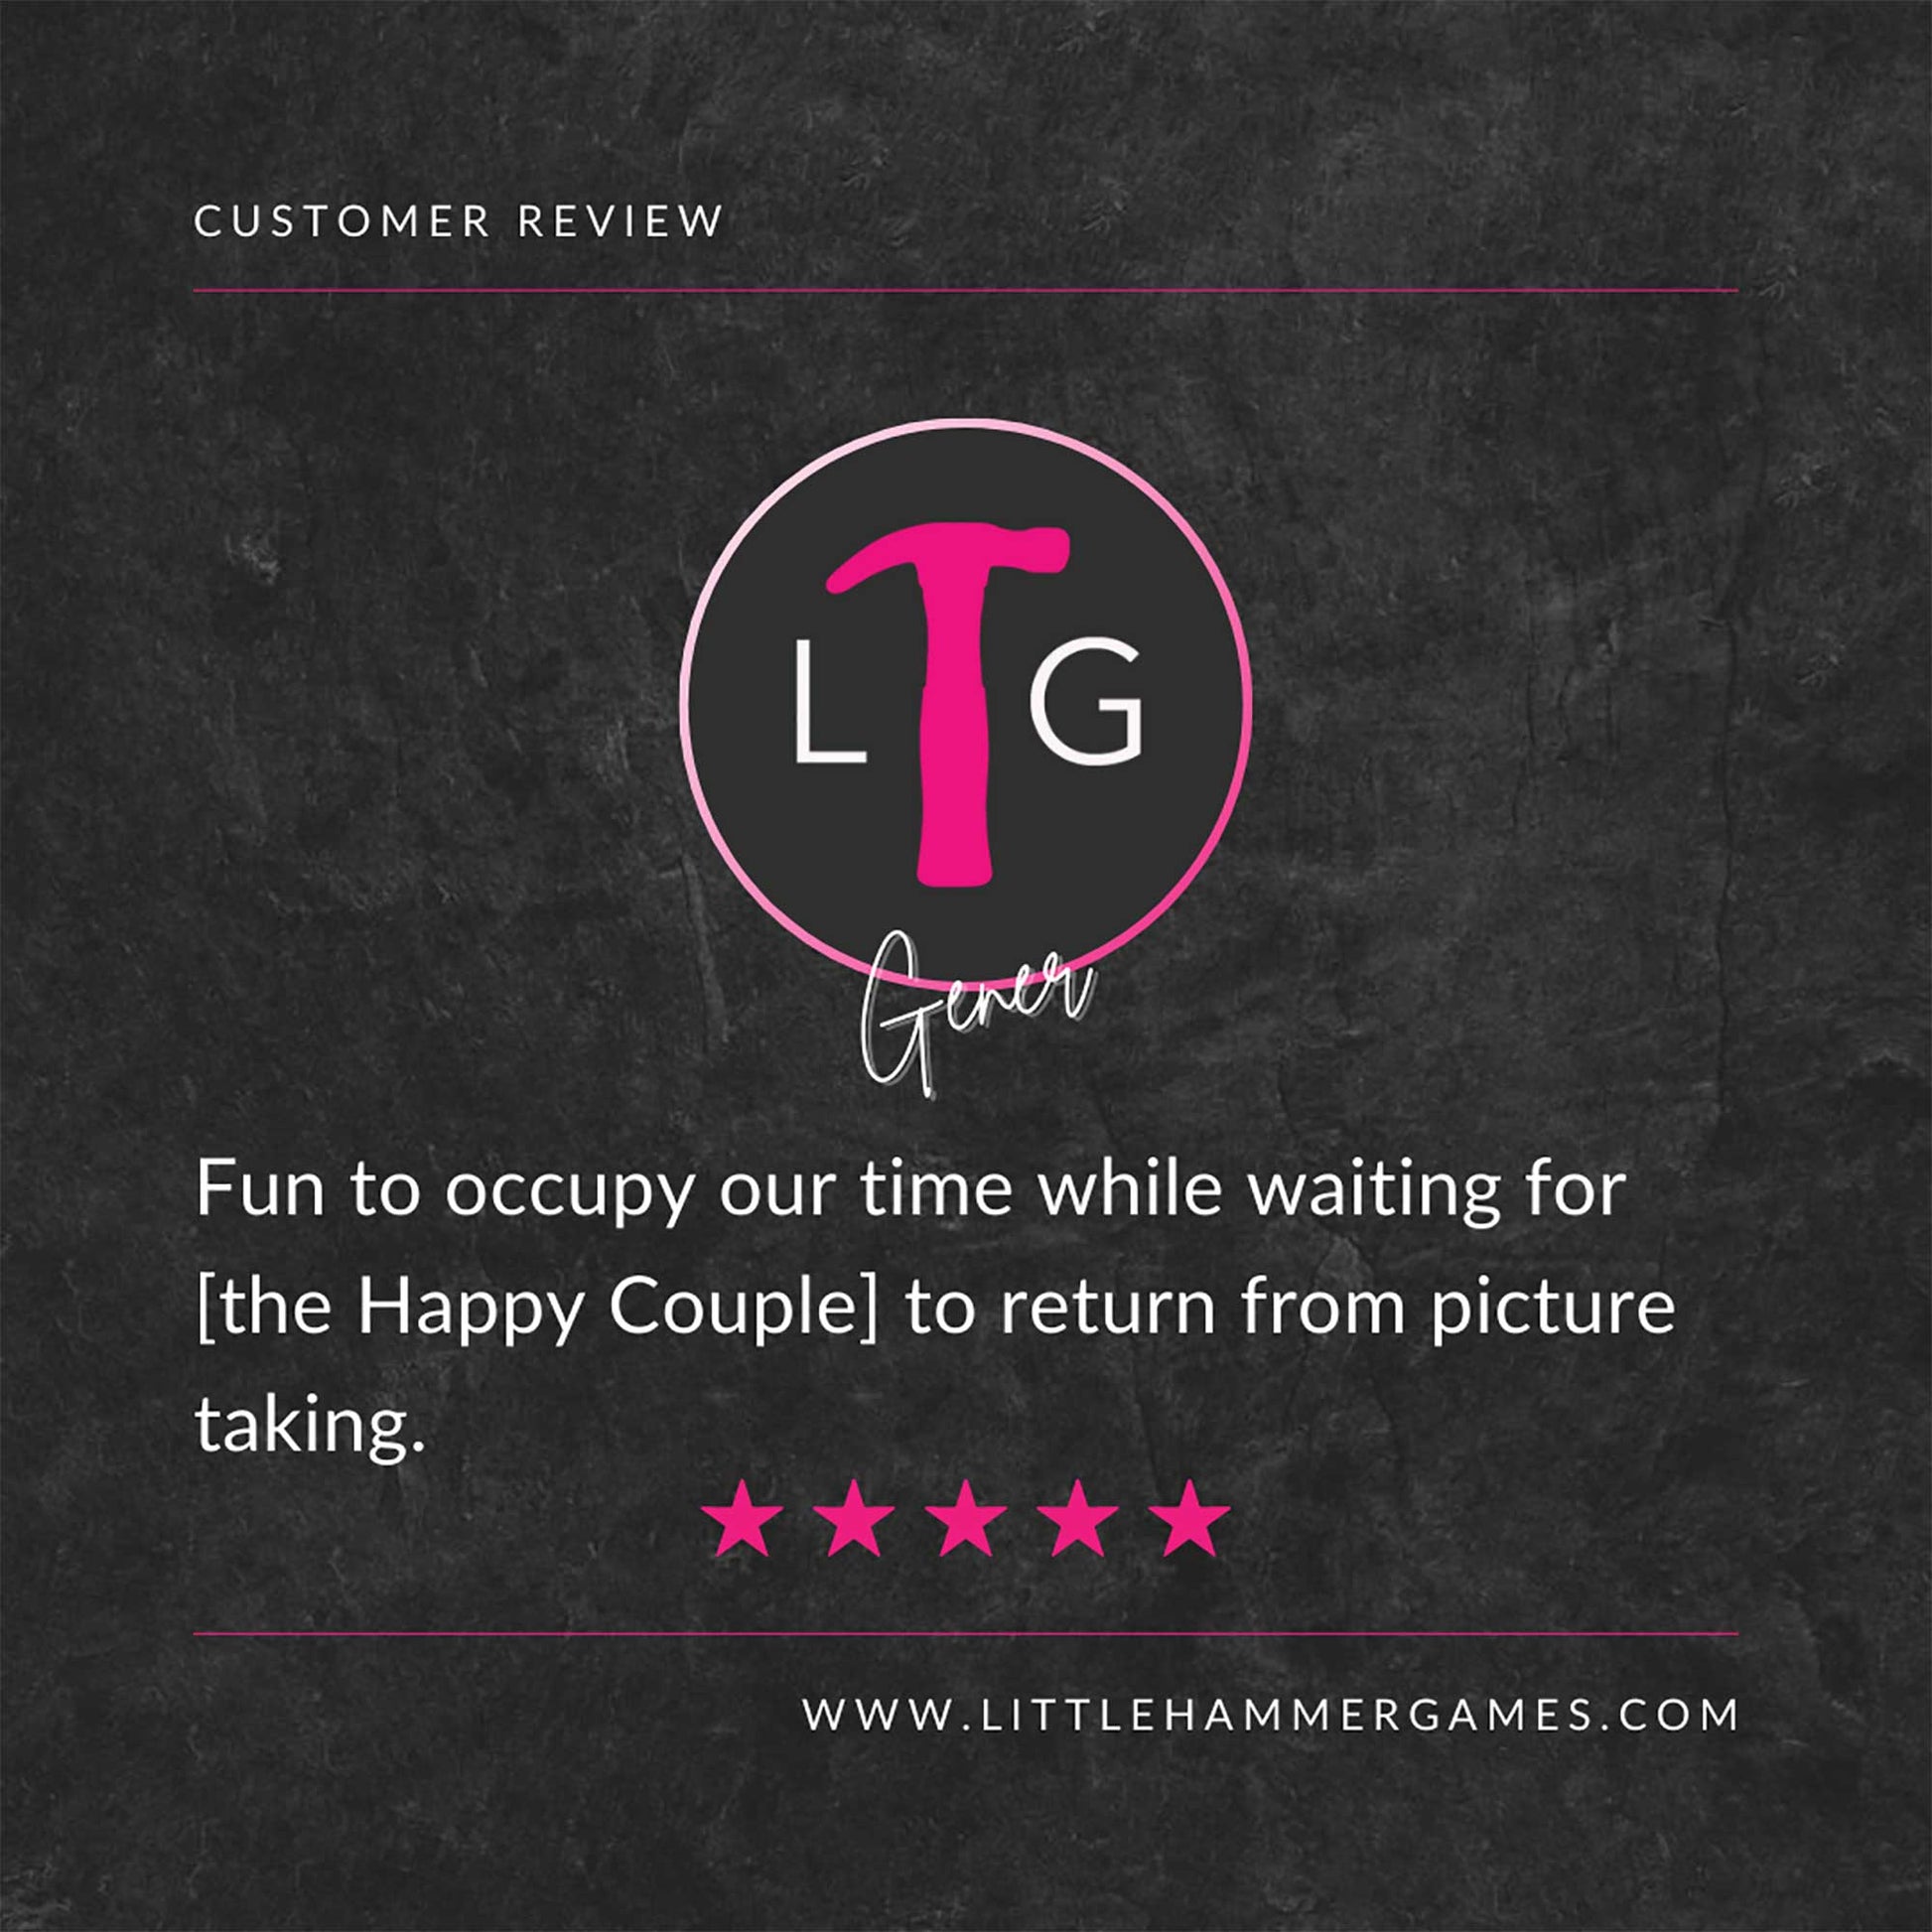 White and pink text on a slate background with a 5-star review that says "Fun to occupy our time while waiting for [the Happy Couple] to return from picture taking"